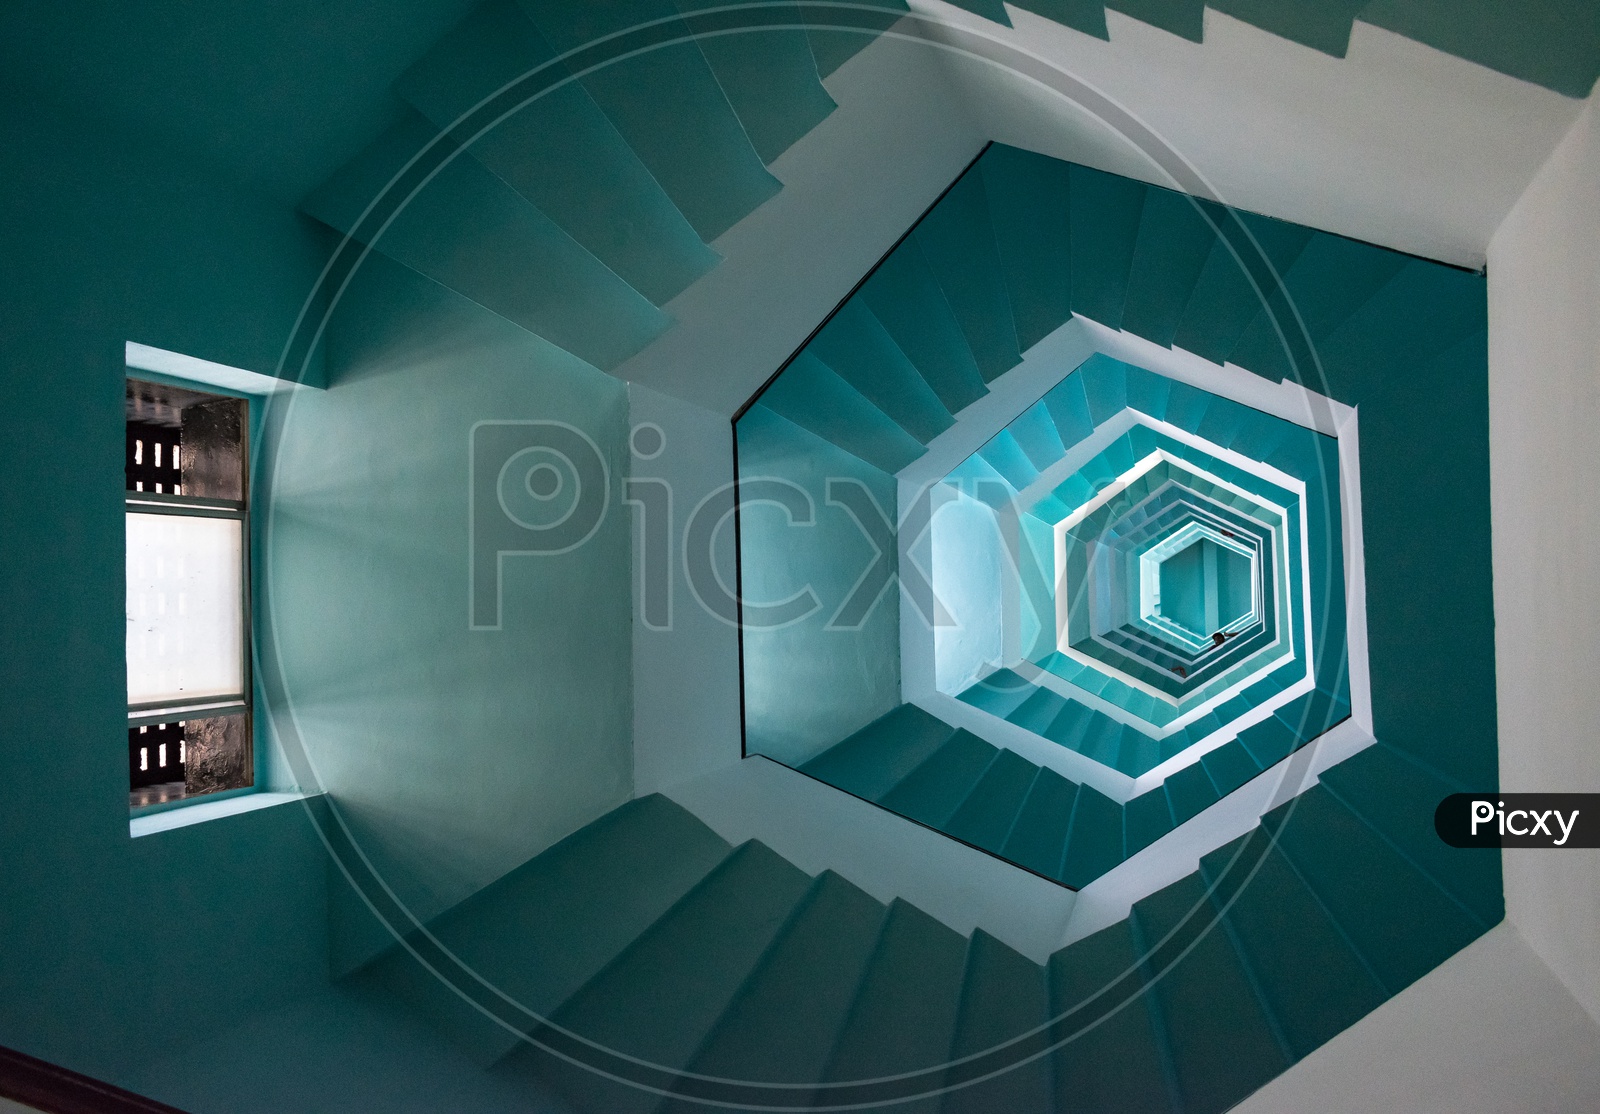 Architecture of Stair Case In Circular Symmetry  In an Building